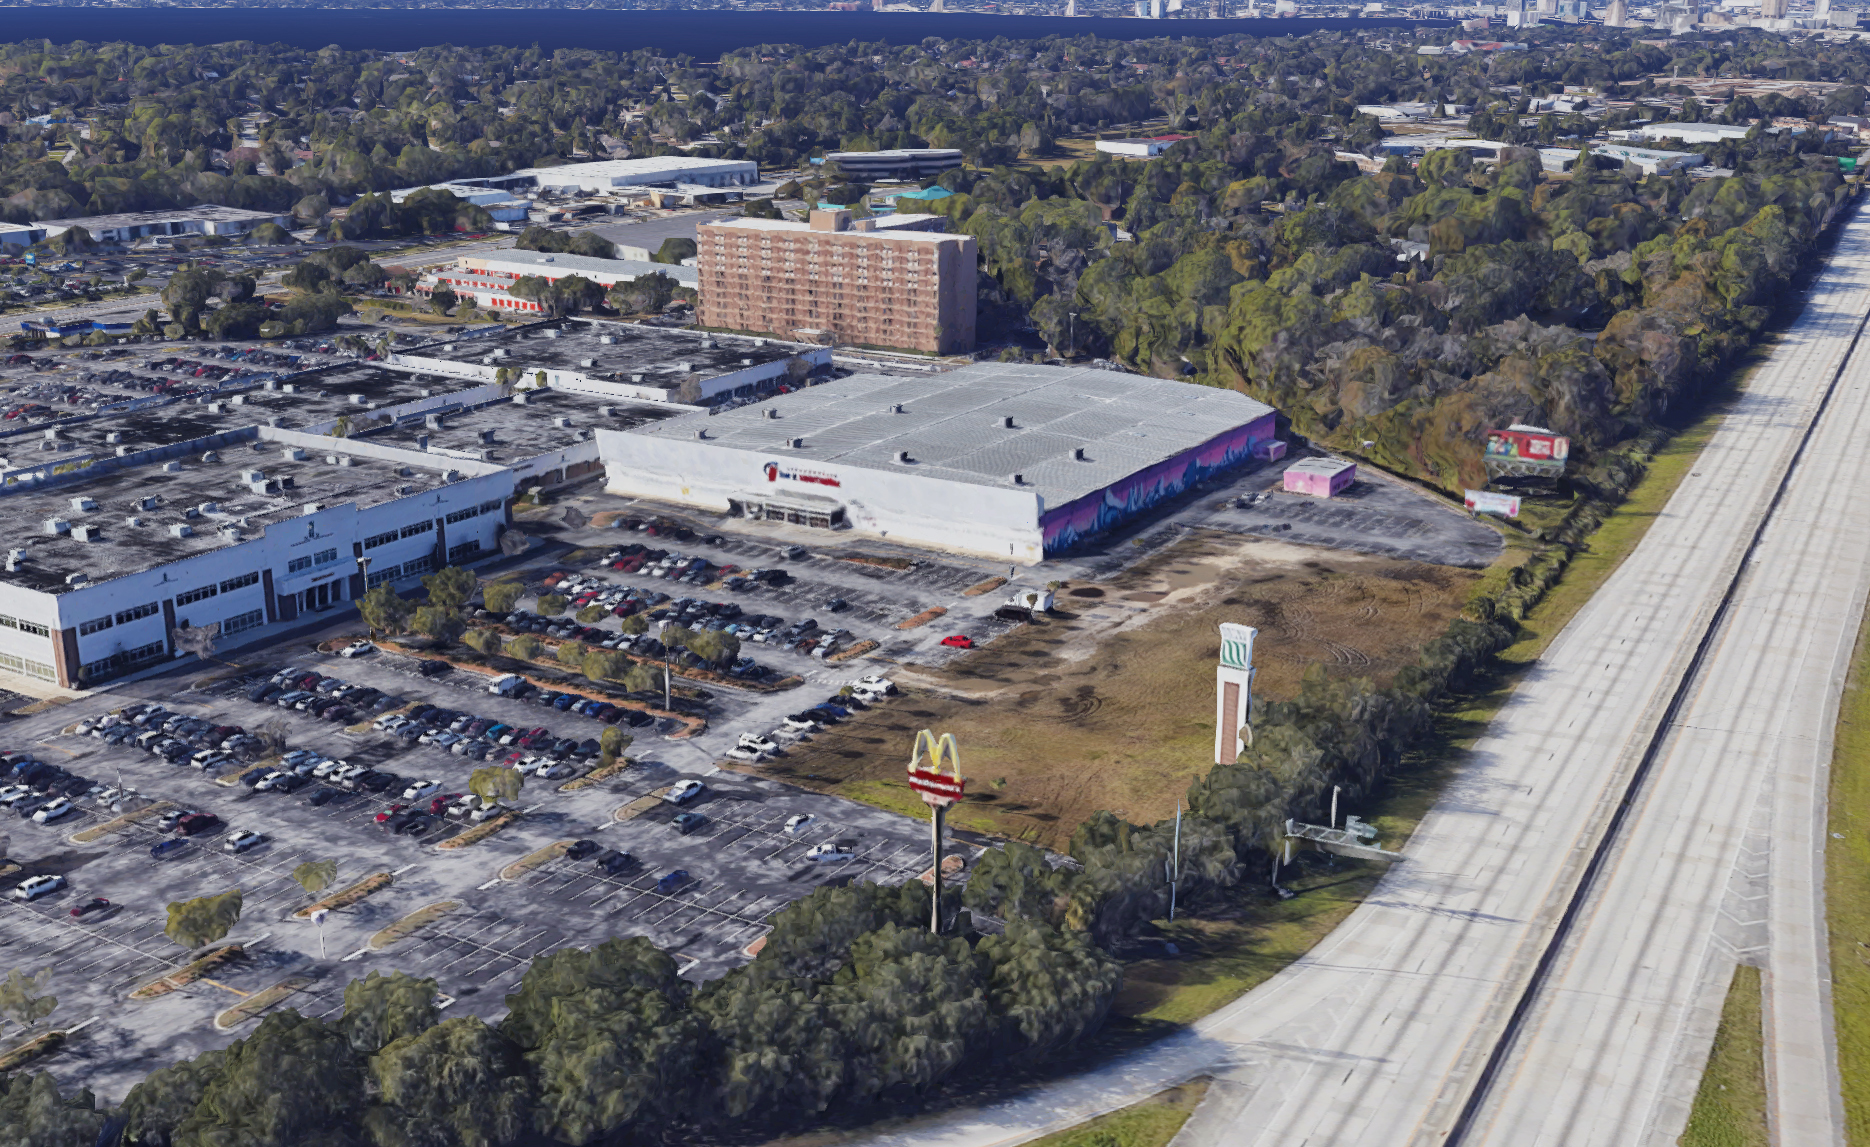 The Sportsplex is part of San Marco East Plaza, which is west of Interstate 95 at Emerson Street. (Google)